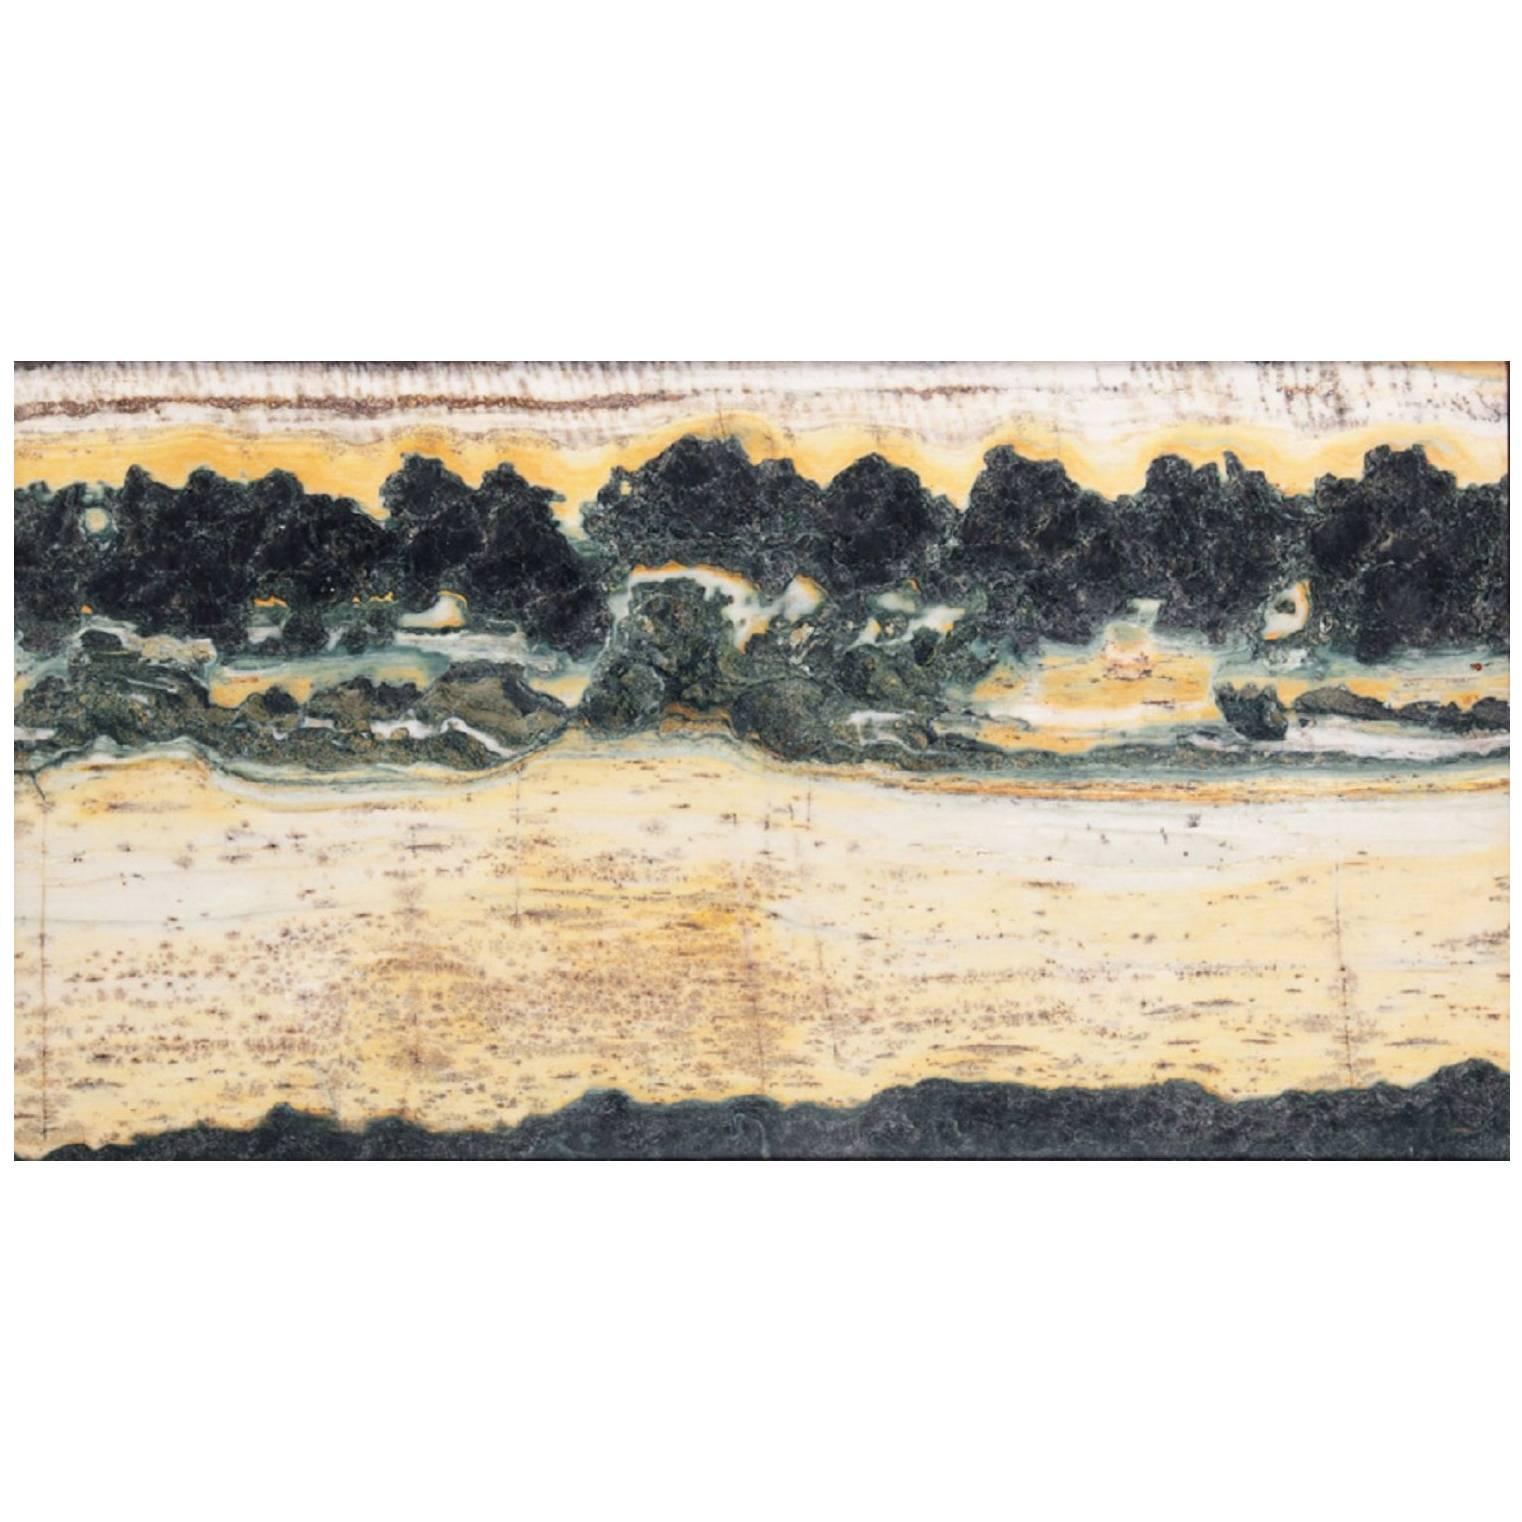 This Chinese extraordinary natural stone painting of a series of mountain tops or crags is called a dream stone Shih-hua. They are cut from historic Dali marble found in the Cangshan mountains of western China. These mysterious mountains, unique in